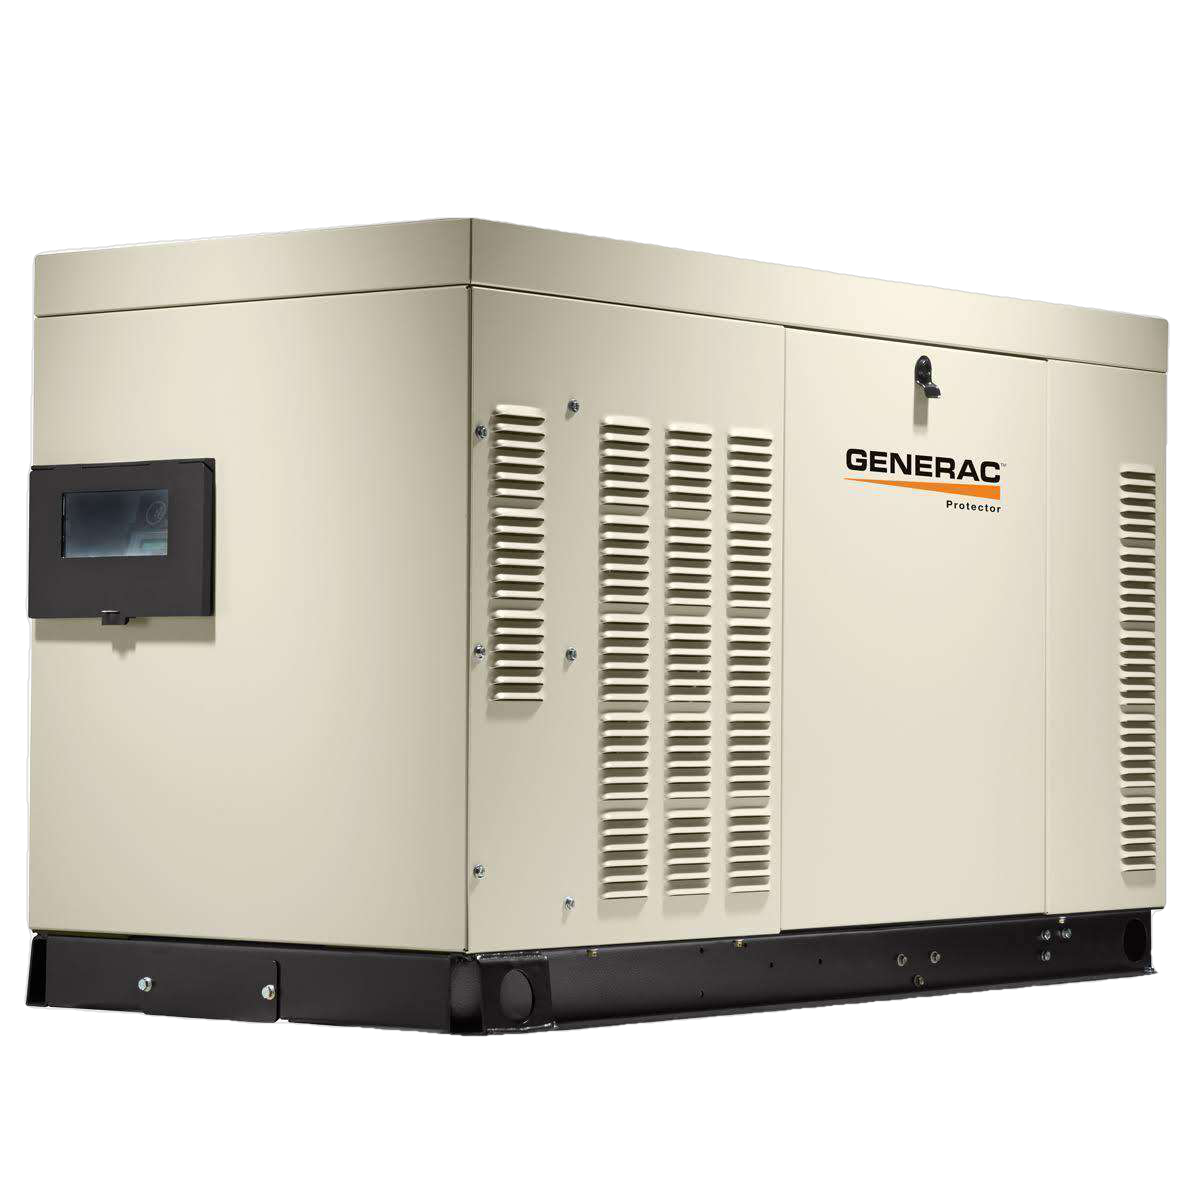 Generac Protector RG03015ANSX 30kW Liquid Cooled 1 PH Standby Generator Manufacturer RFB